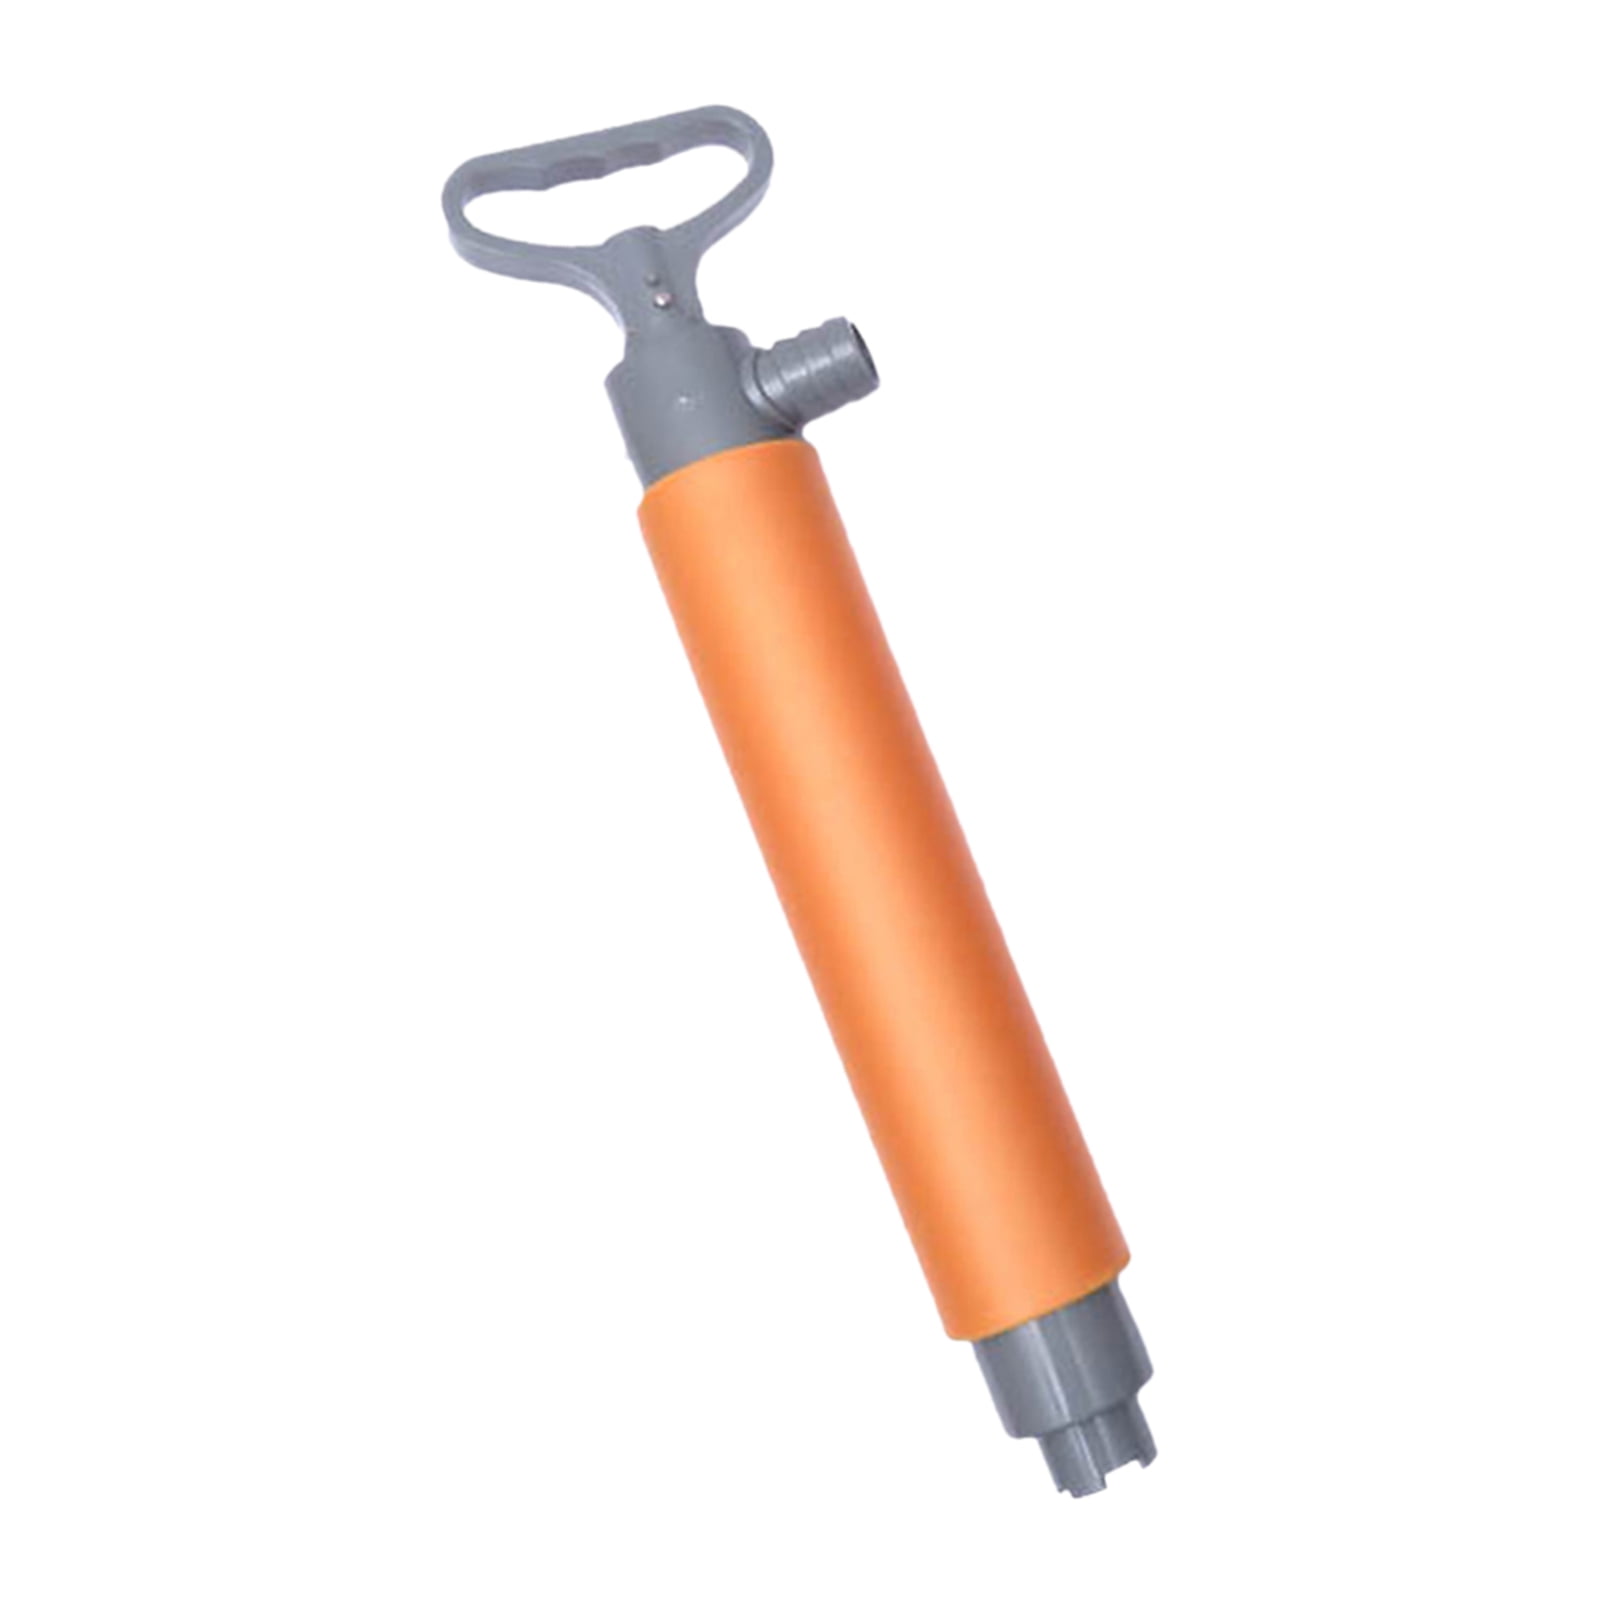 Bilge Pump for Kayaks,Canoes and Boats,Manual Kayak Hand Water Pumps  Portable ,Must Have Equipment for Kayakers - Orange 